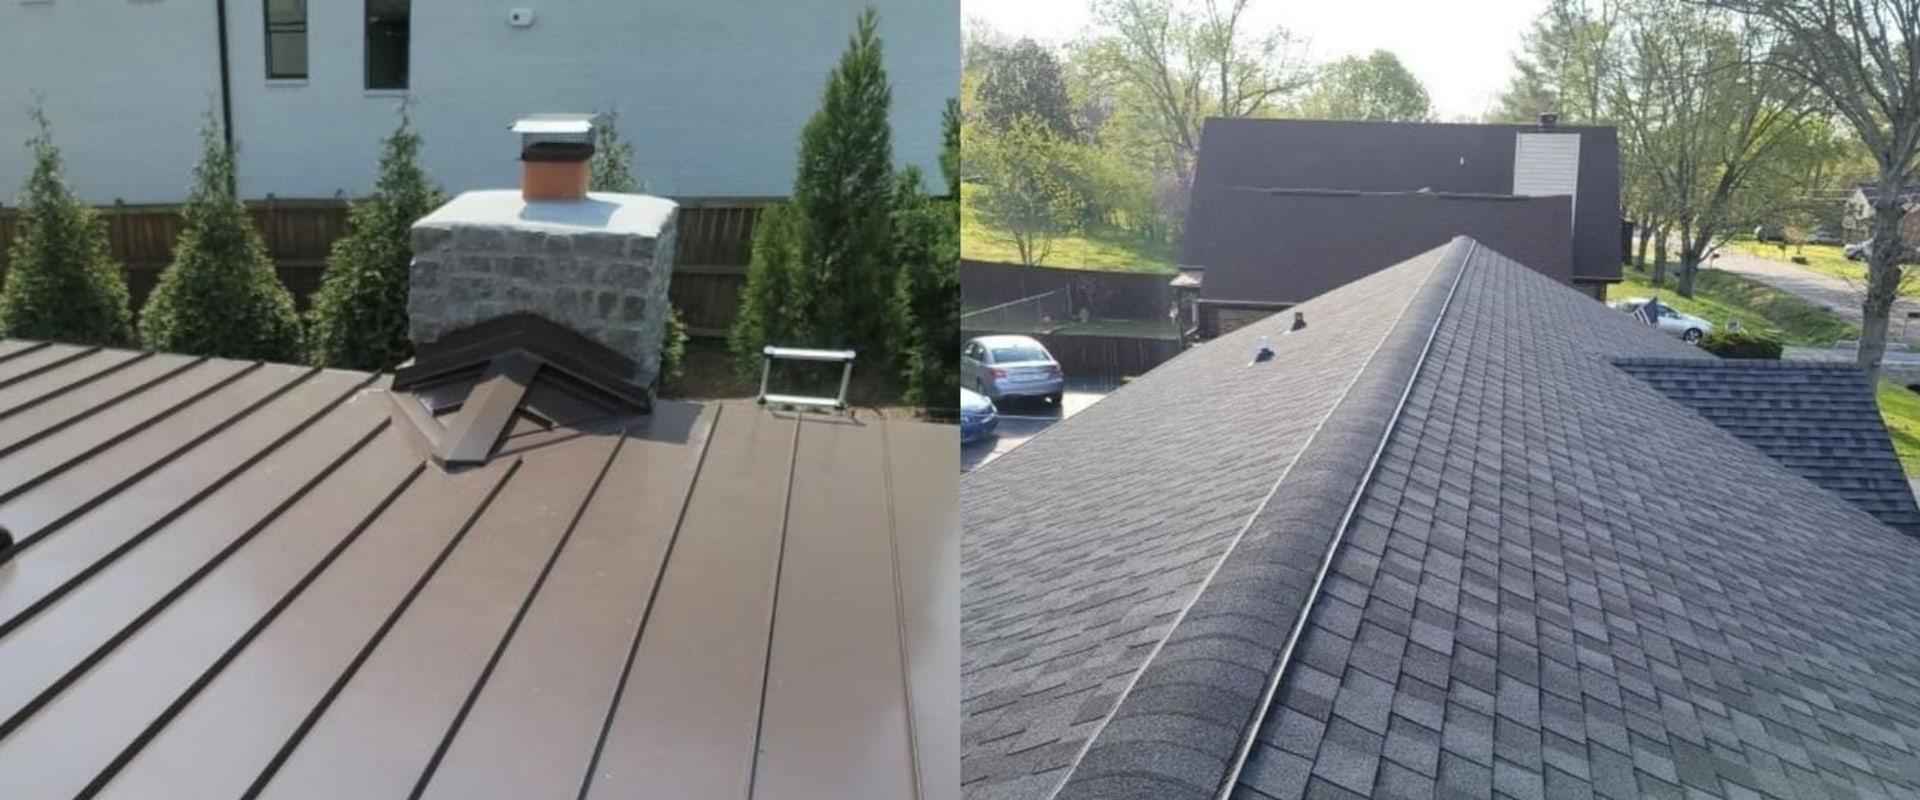 How much more does a metal roof cost than shingles?